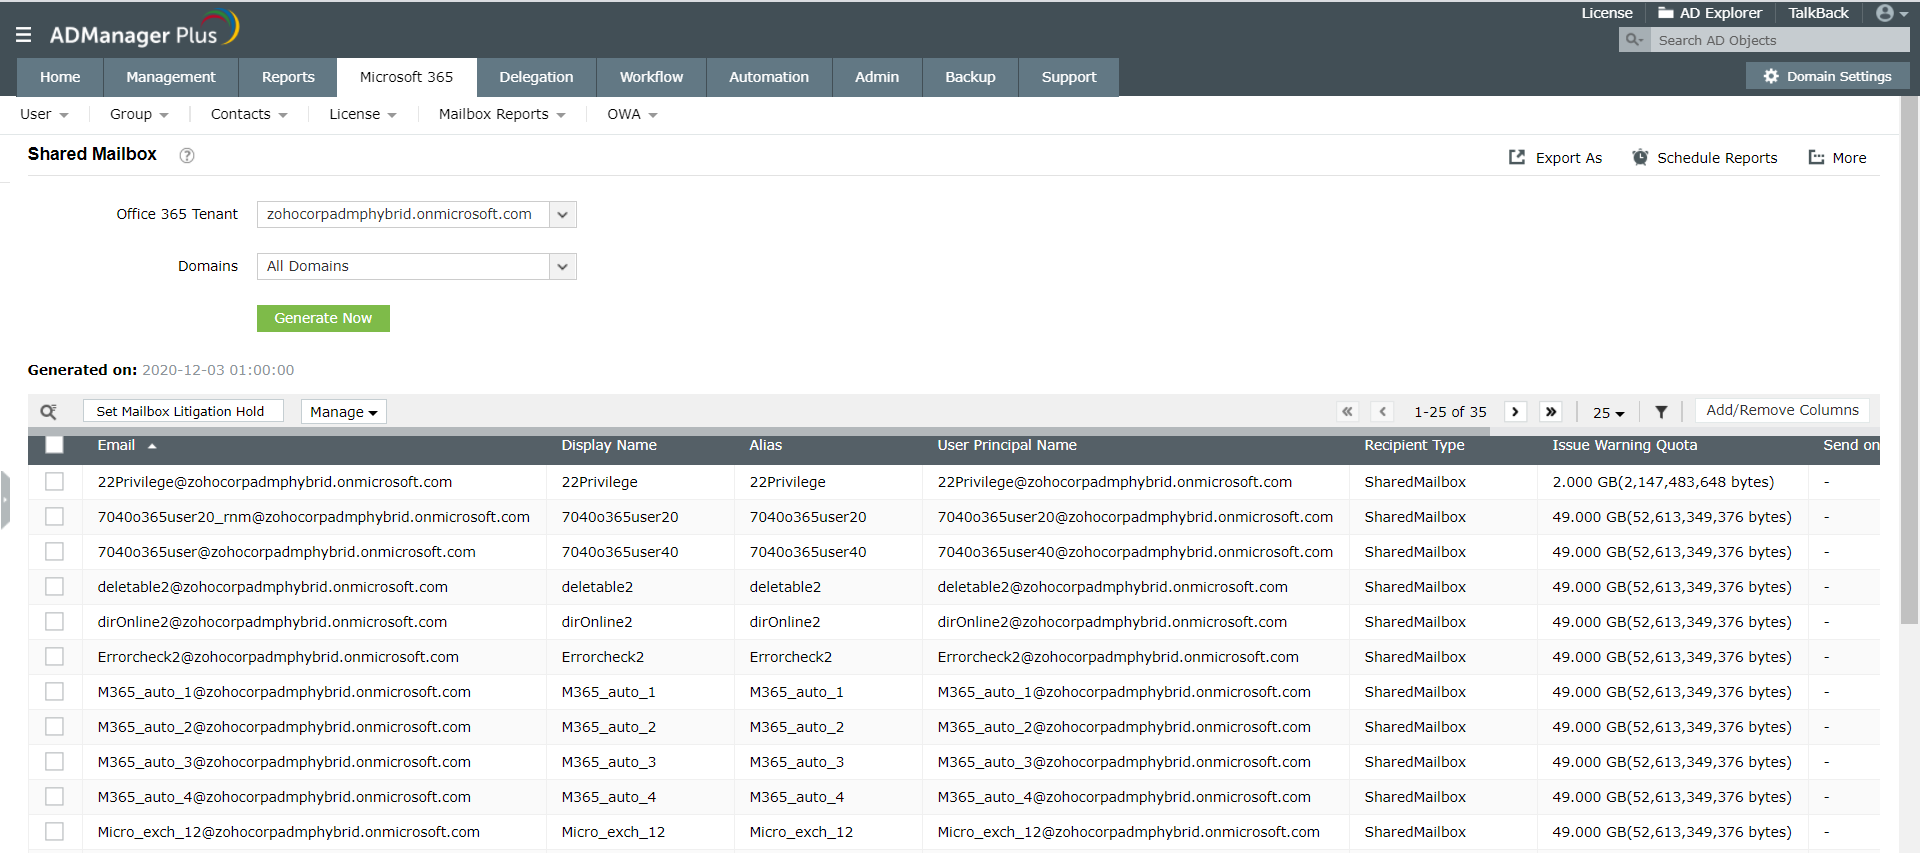 Microsoft 365 shared mailbox reports using ADManager Plus